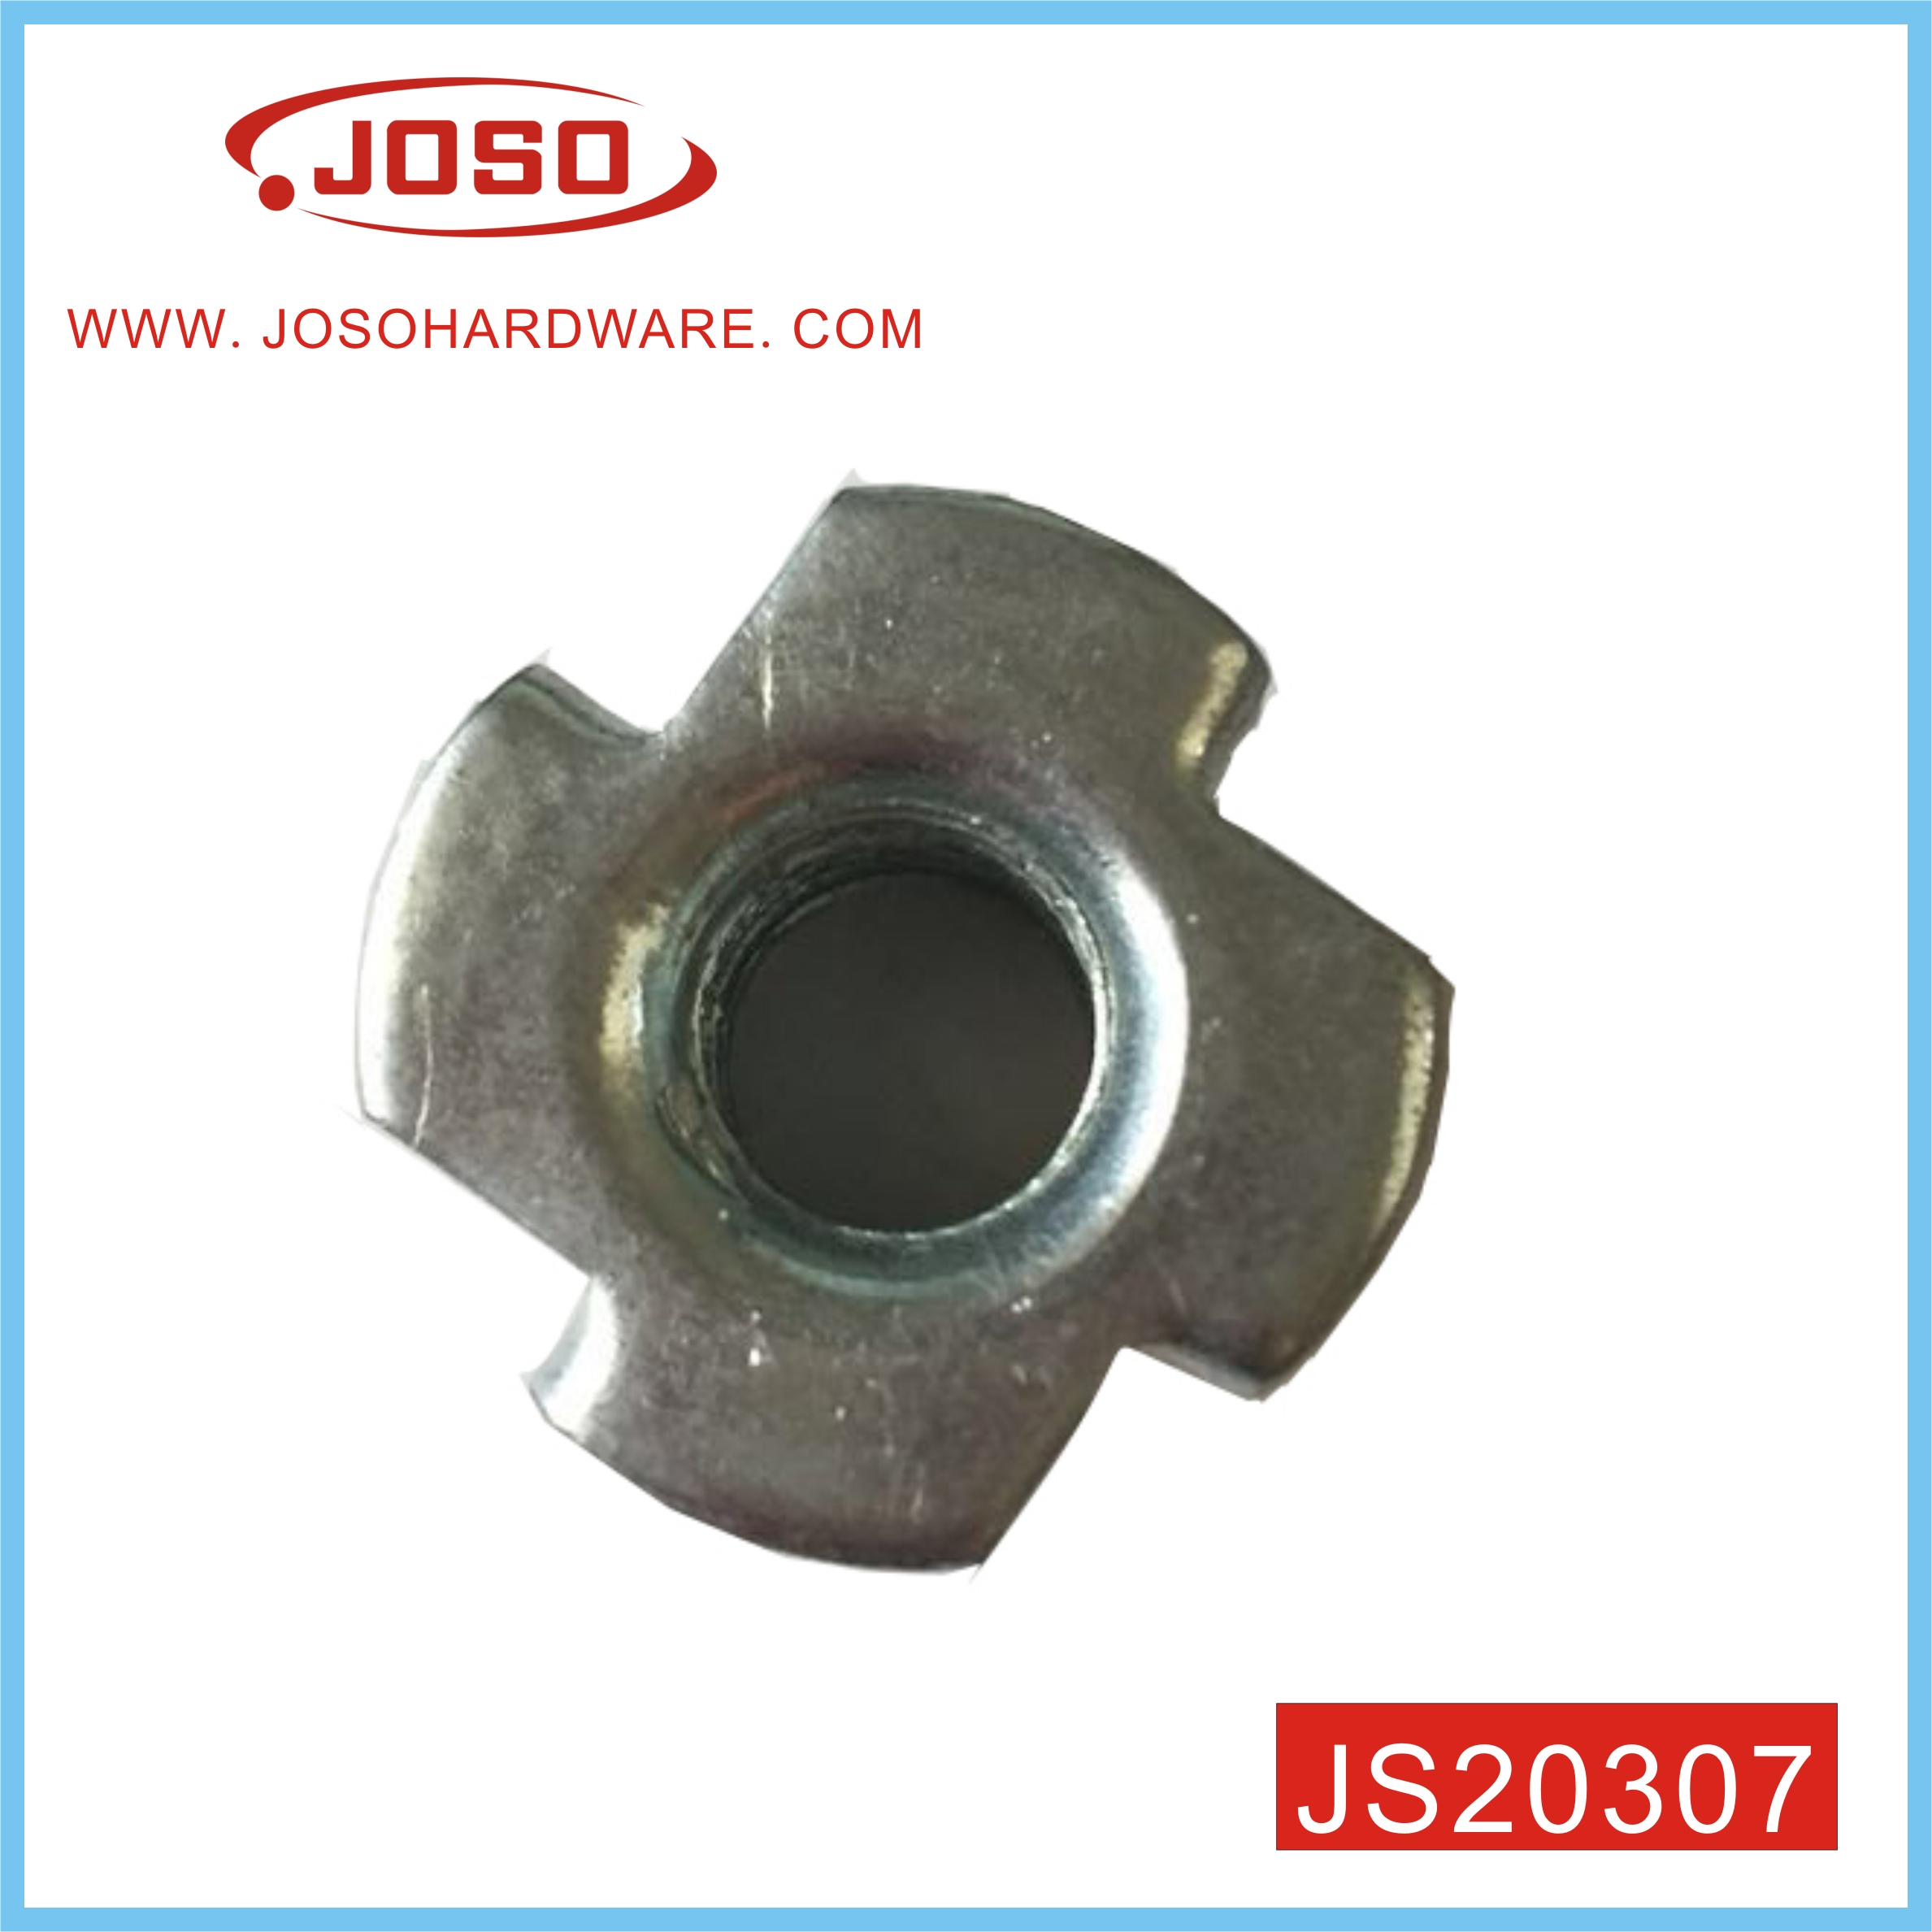 Zinc Plated Steel Tee Nut With Four Prongs 